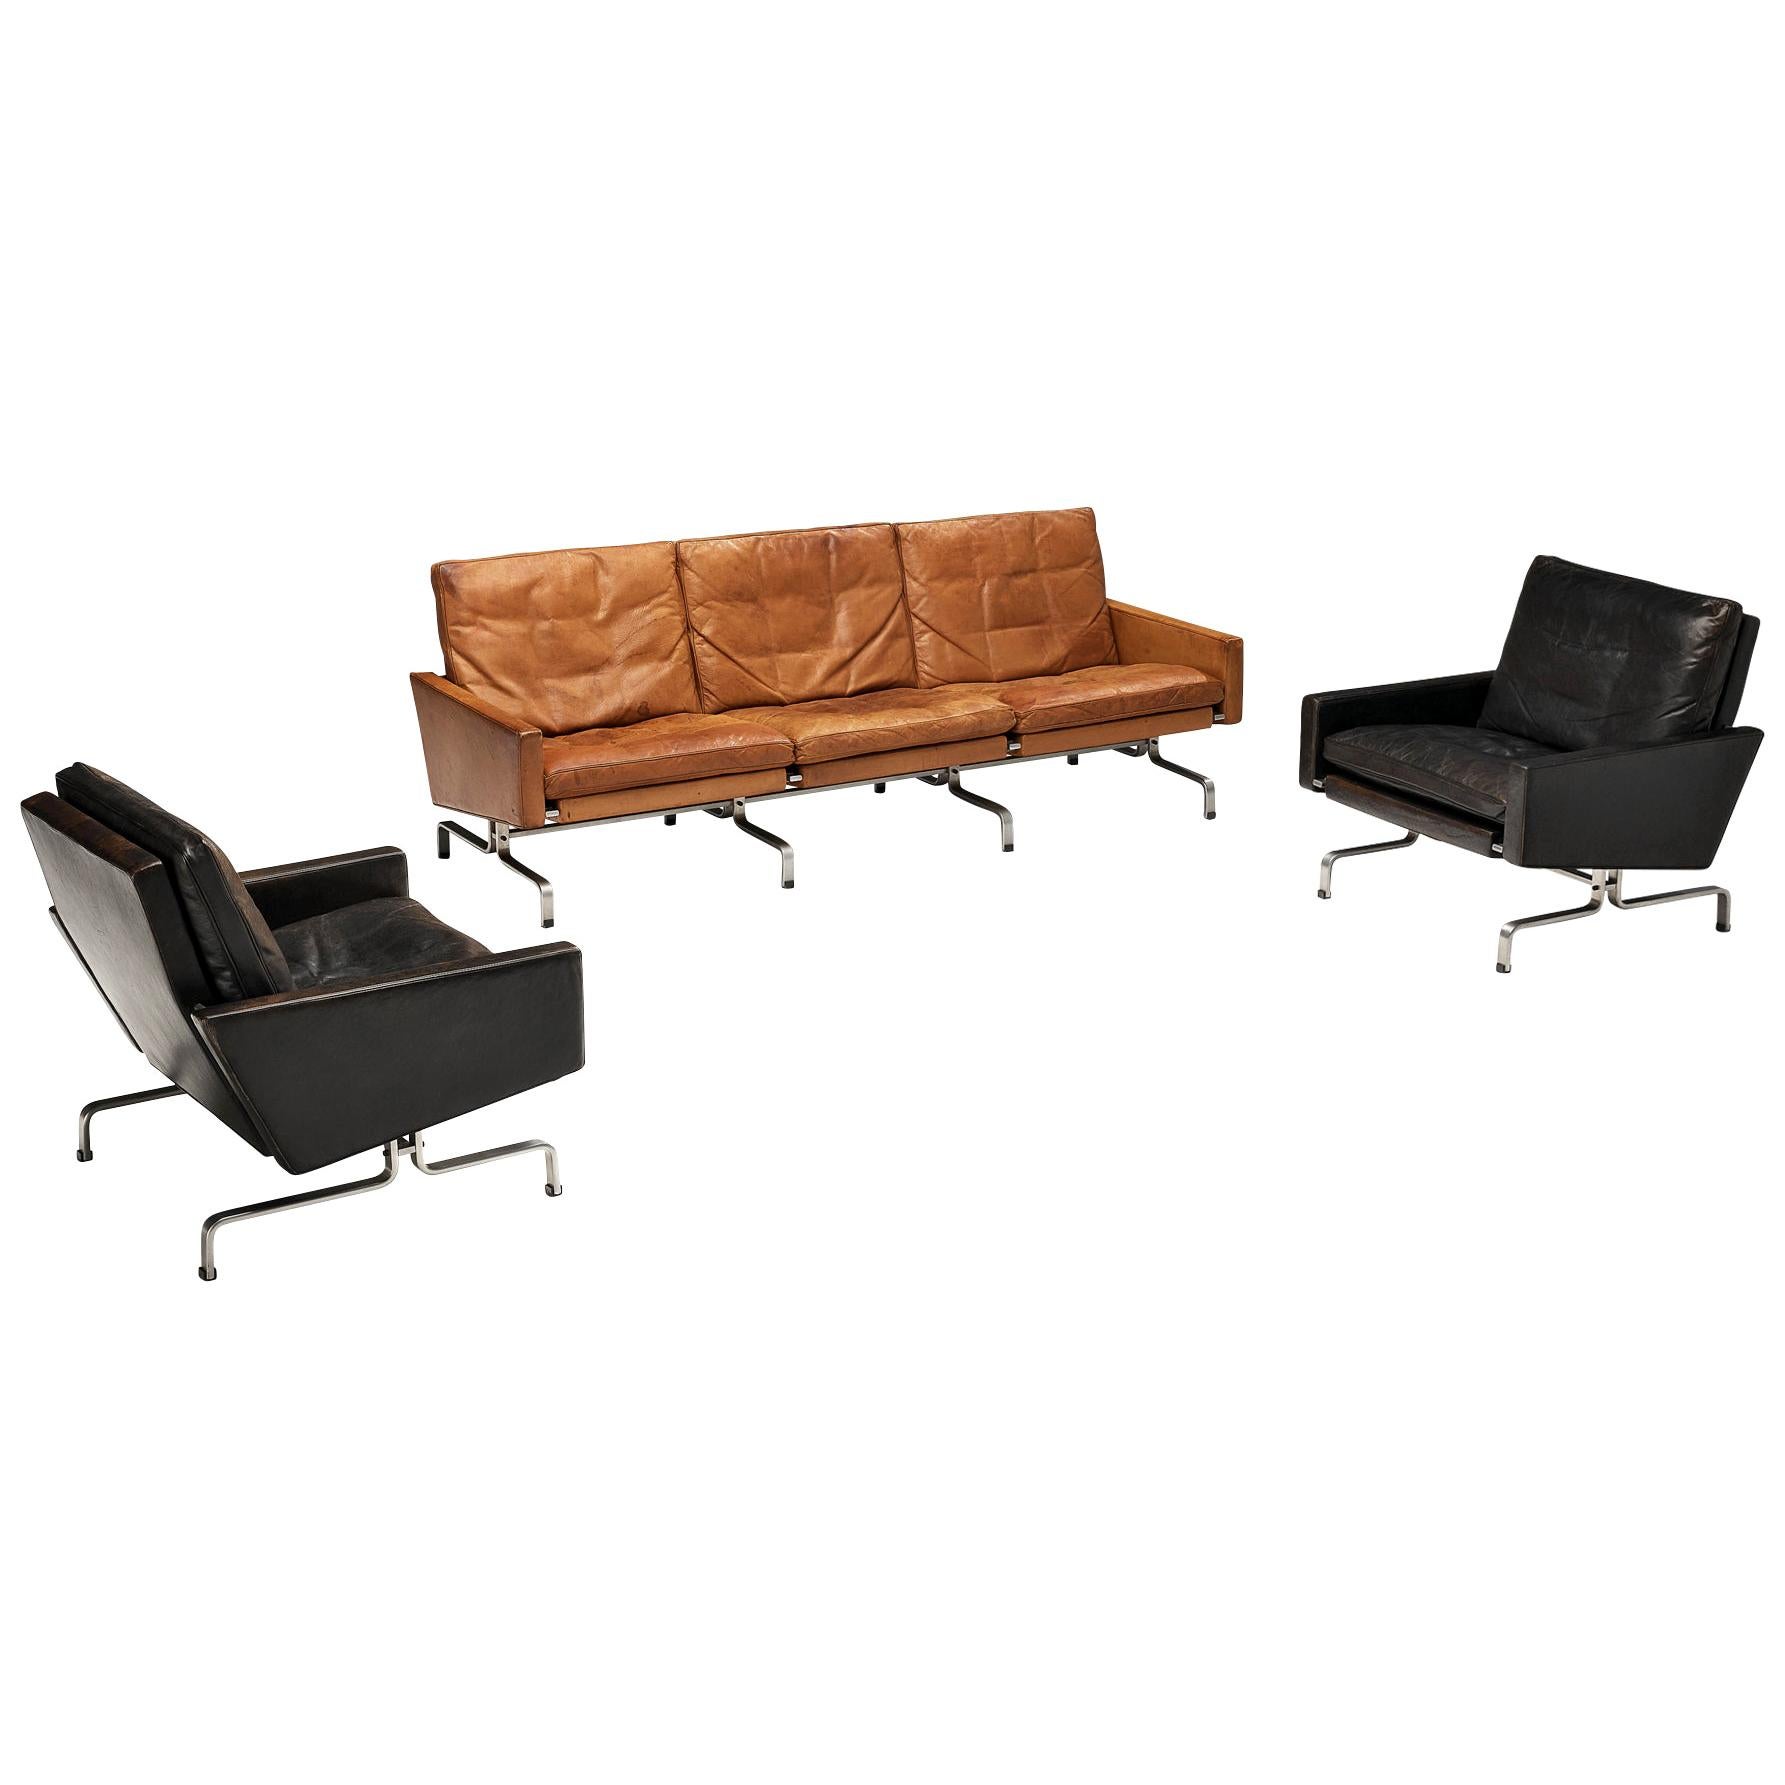 Set of Poul Kjaerholm 'PK31-1' Lounge Chairs and PK31 Sofa in Leather